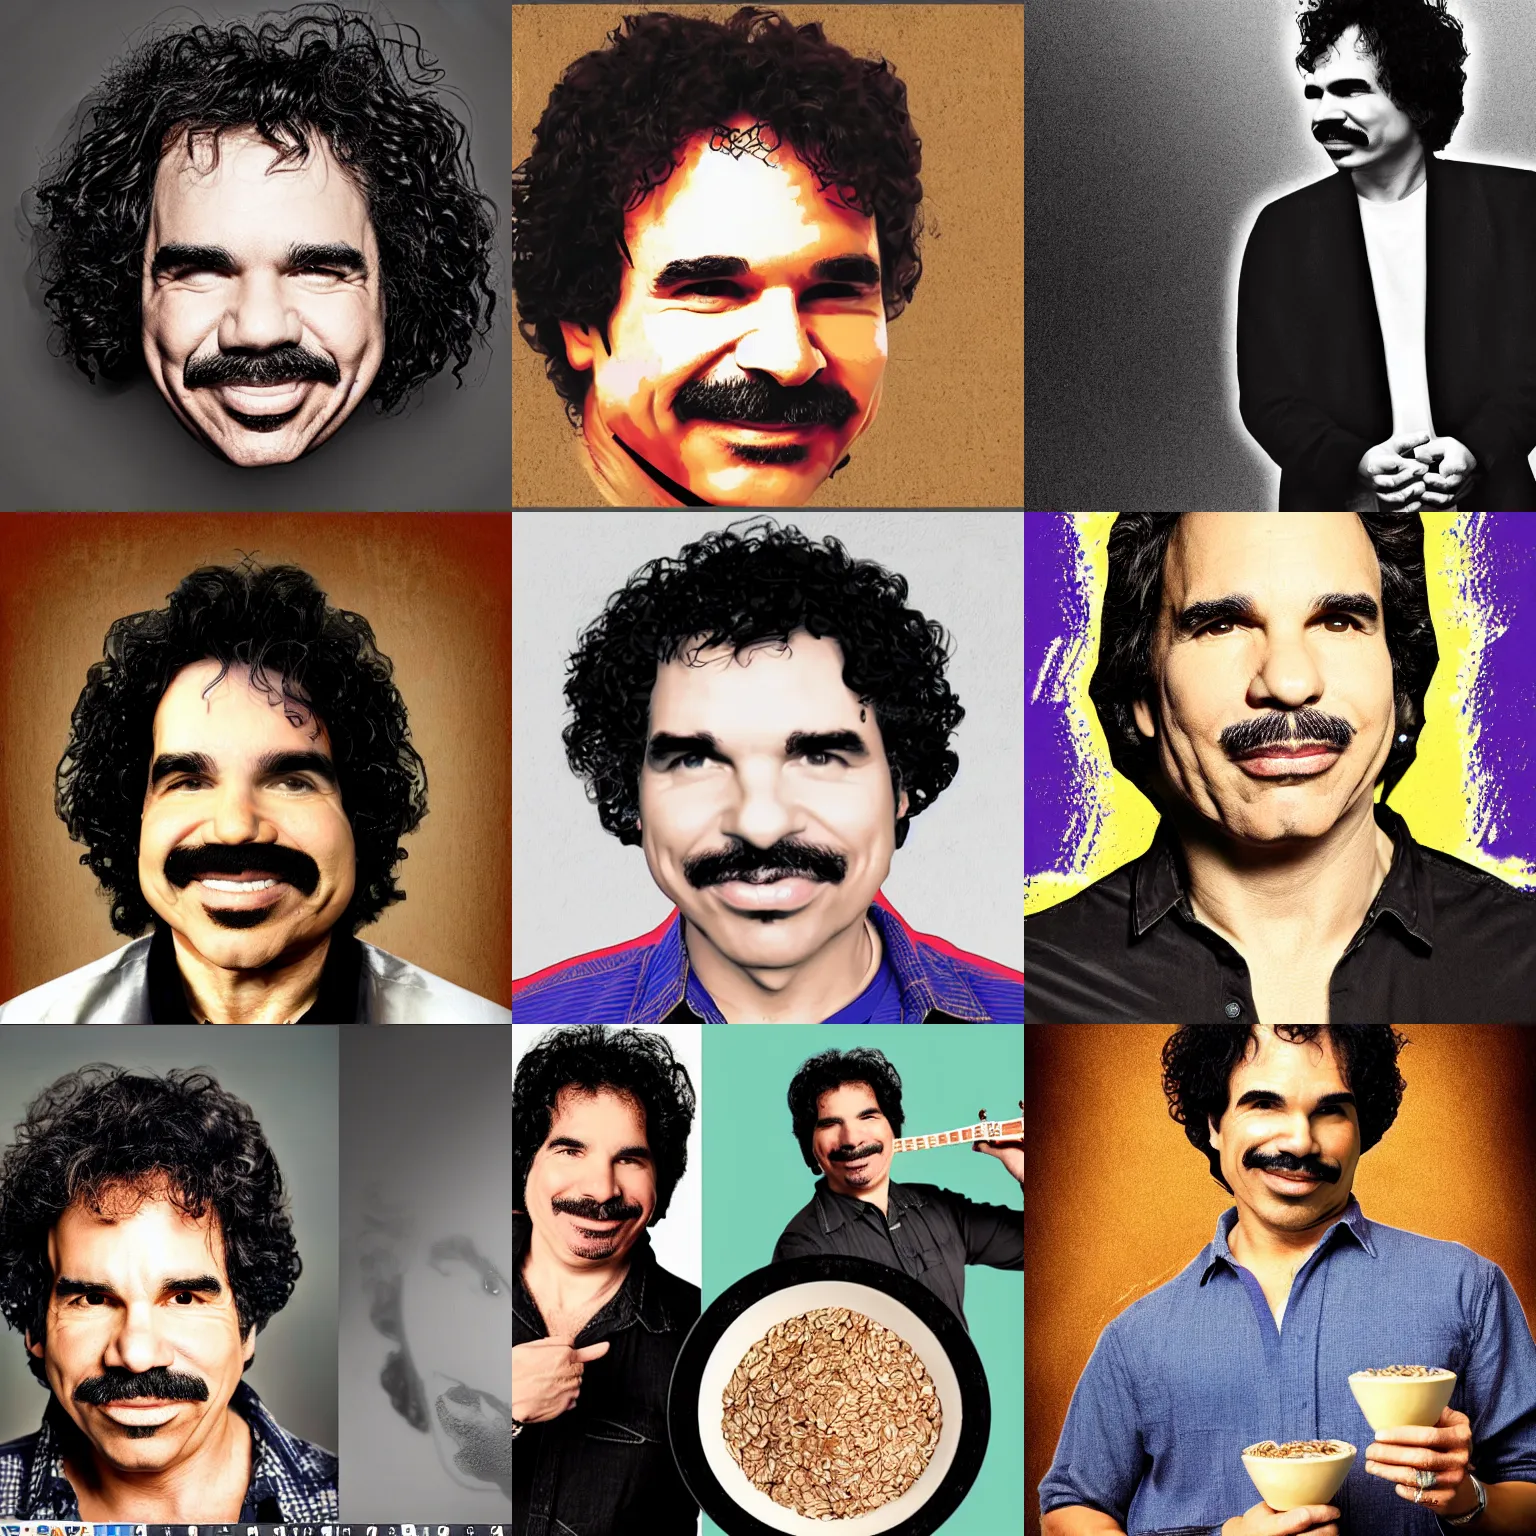 Prompt: musician john oates face merged with a bowl of oats, face, stylized, minimalist, hyper realistic, simple background